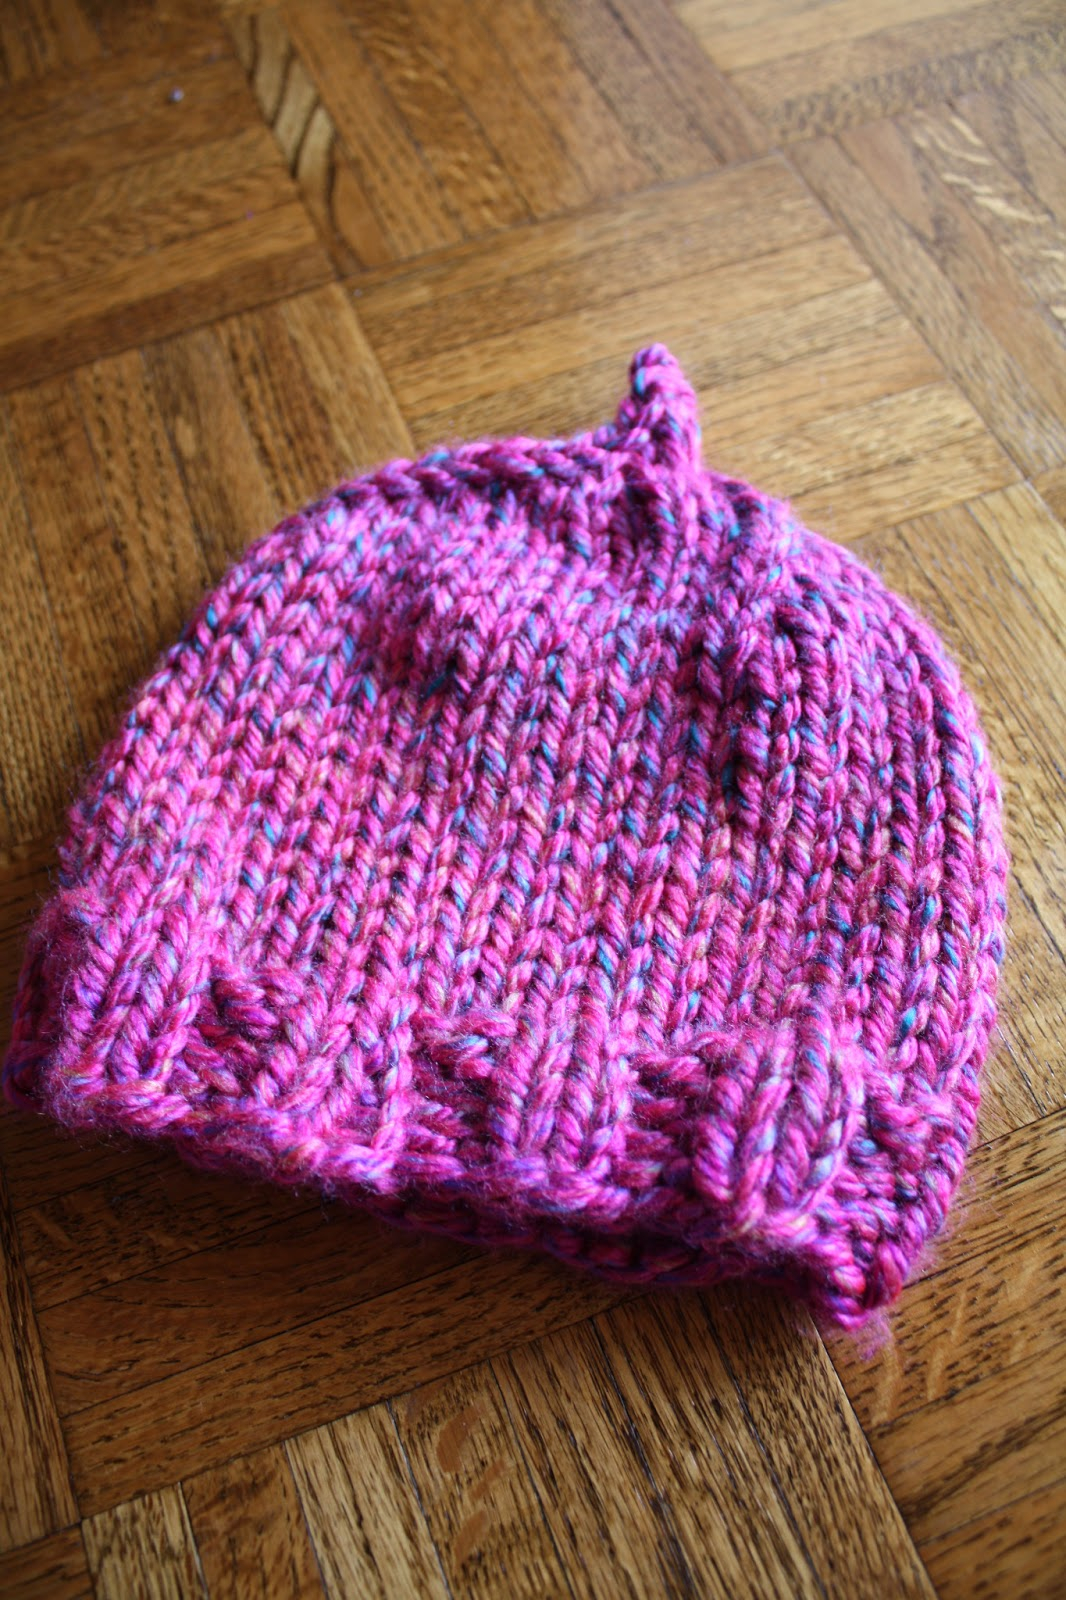 Free Knitting Patterns For Hats Uk Where To Buy Chunky Knit Child Hat Pattern Sewing 151b7 9b479